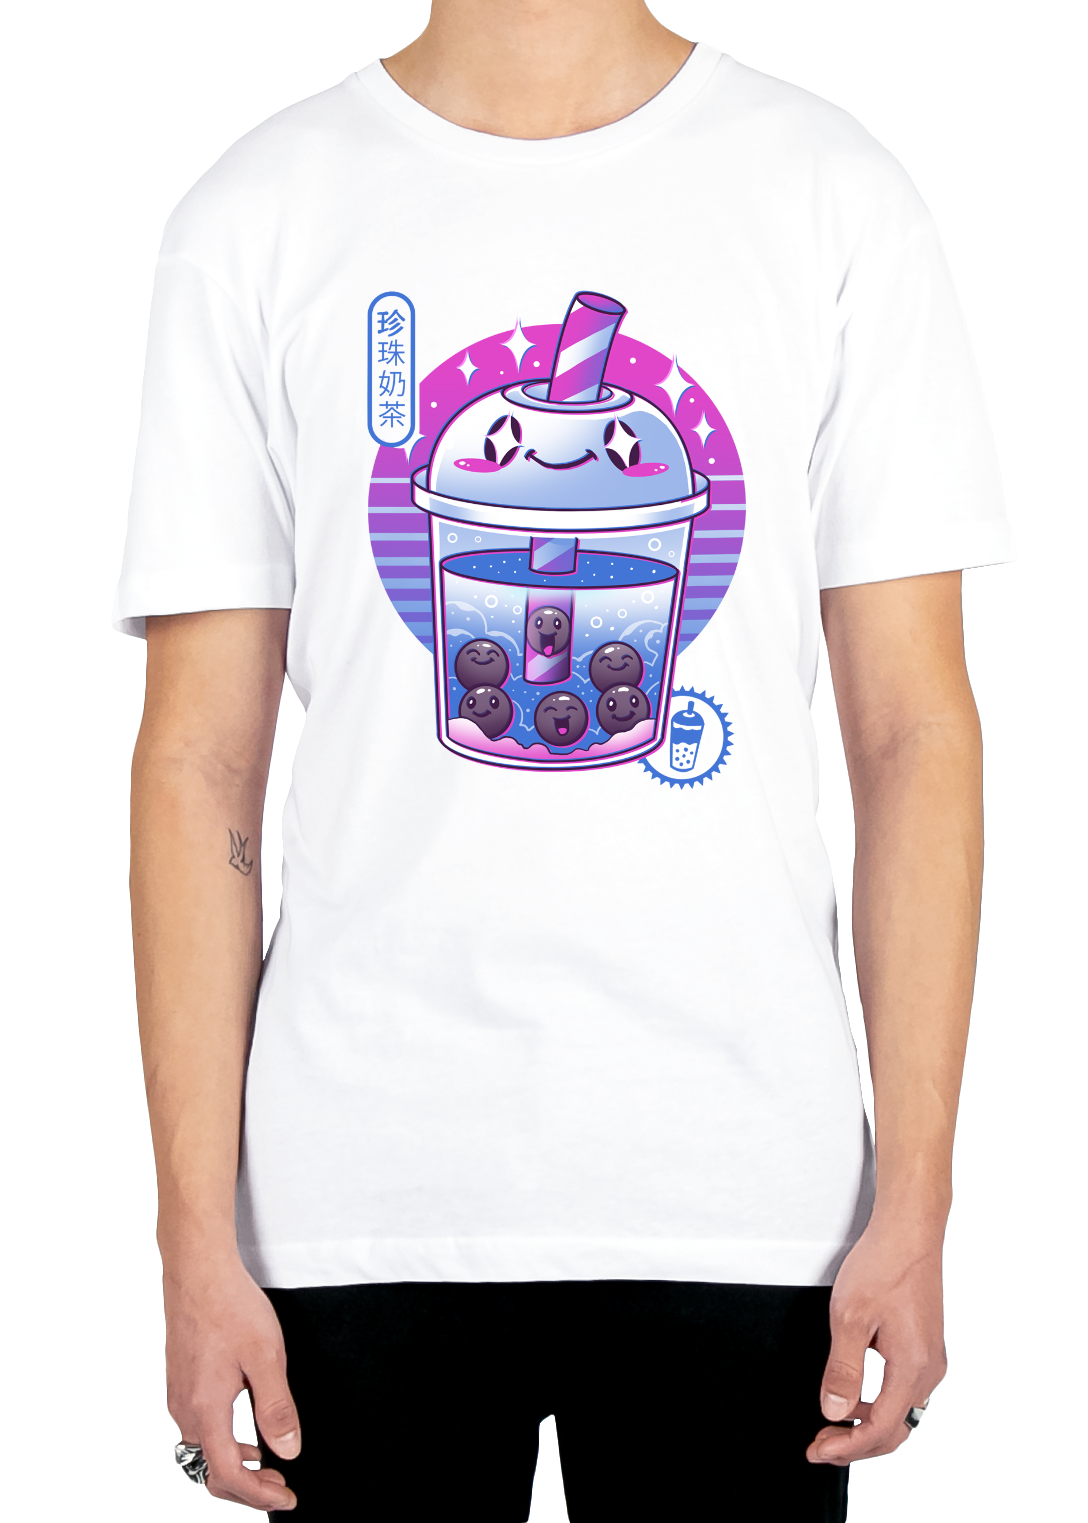 It's Boba Time Tee